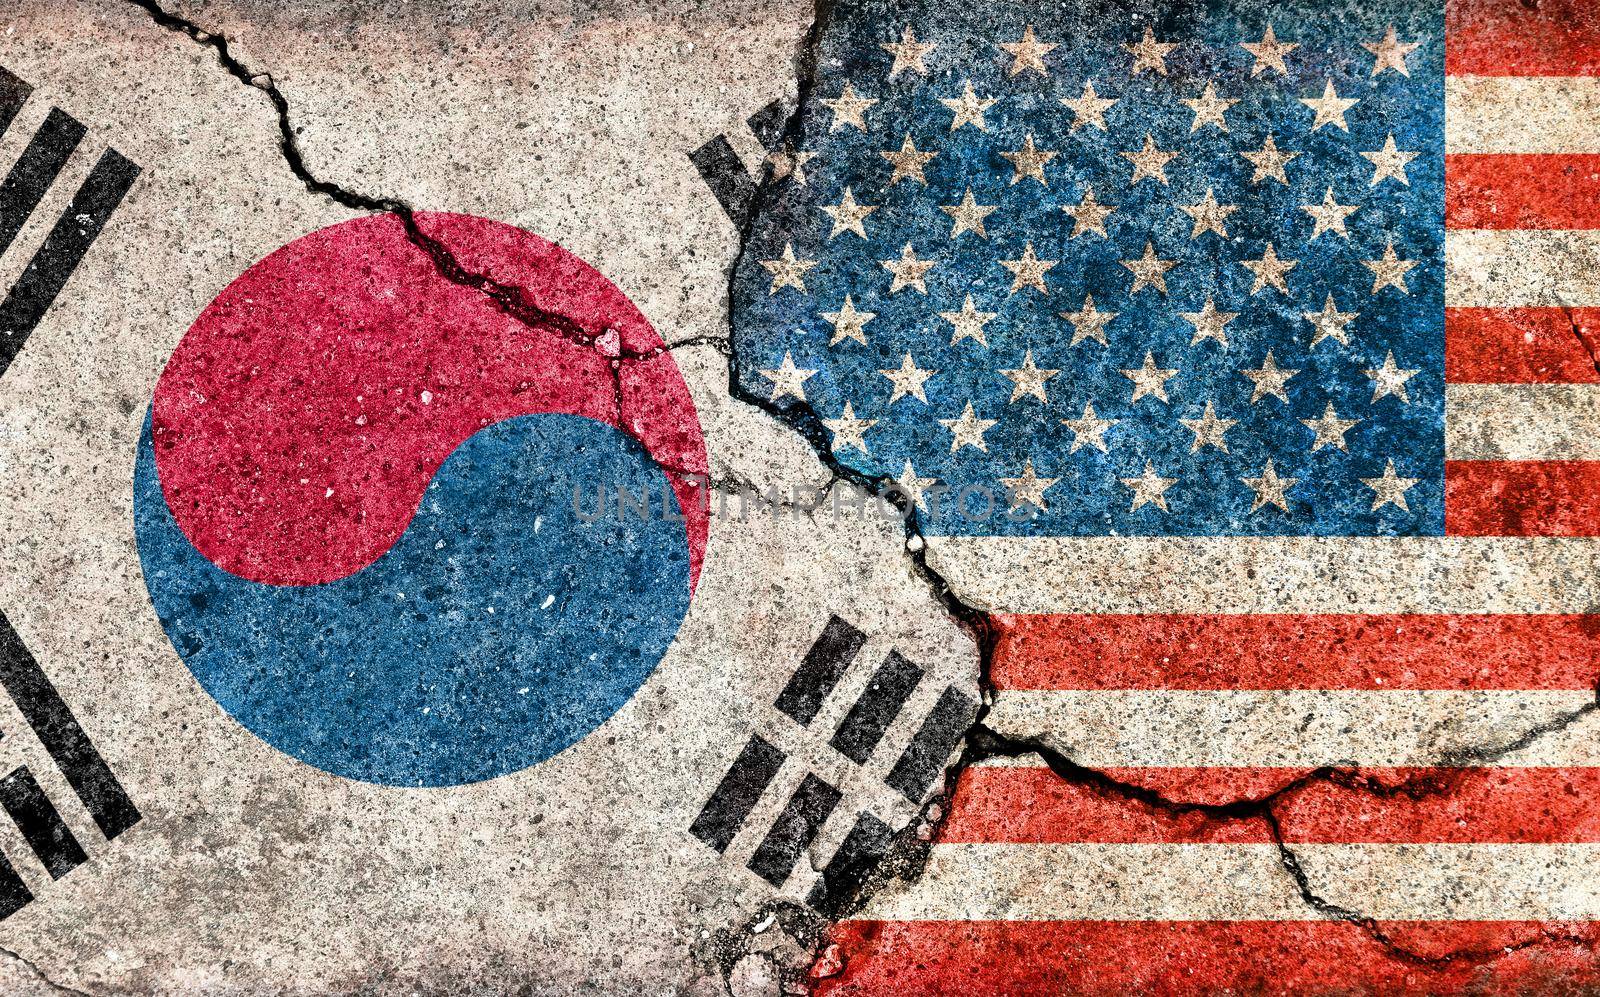 Grunge country flag illustration (cracked concrete background) / USA vs South korea (Political or economic conflict) by barks